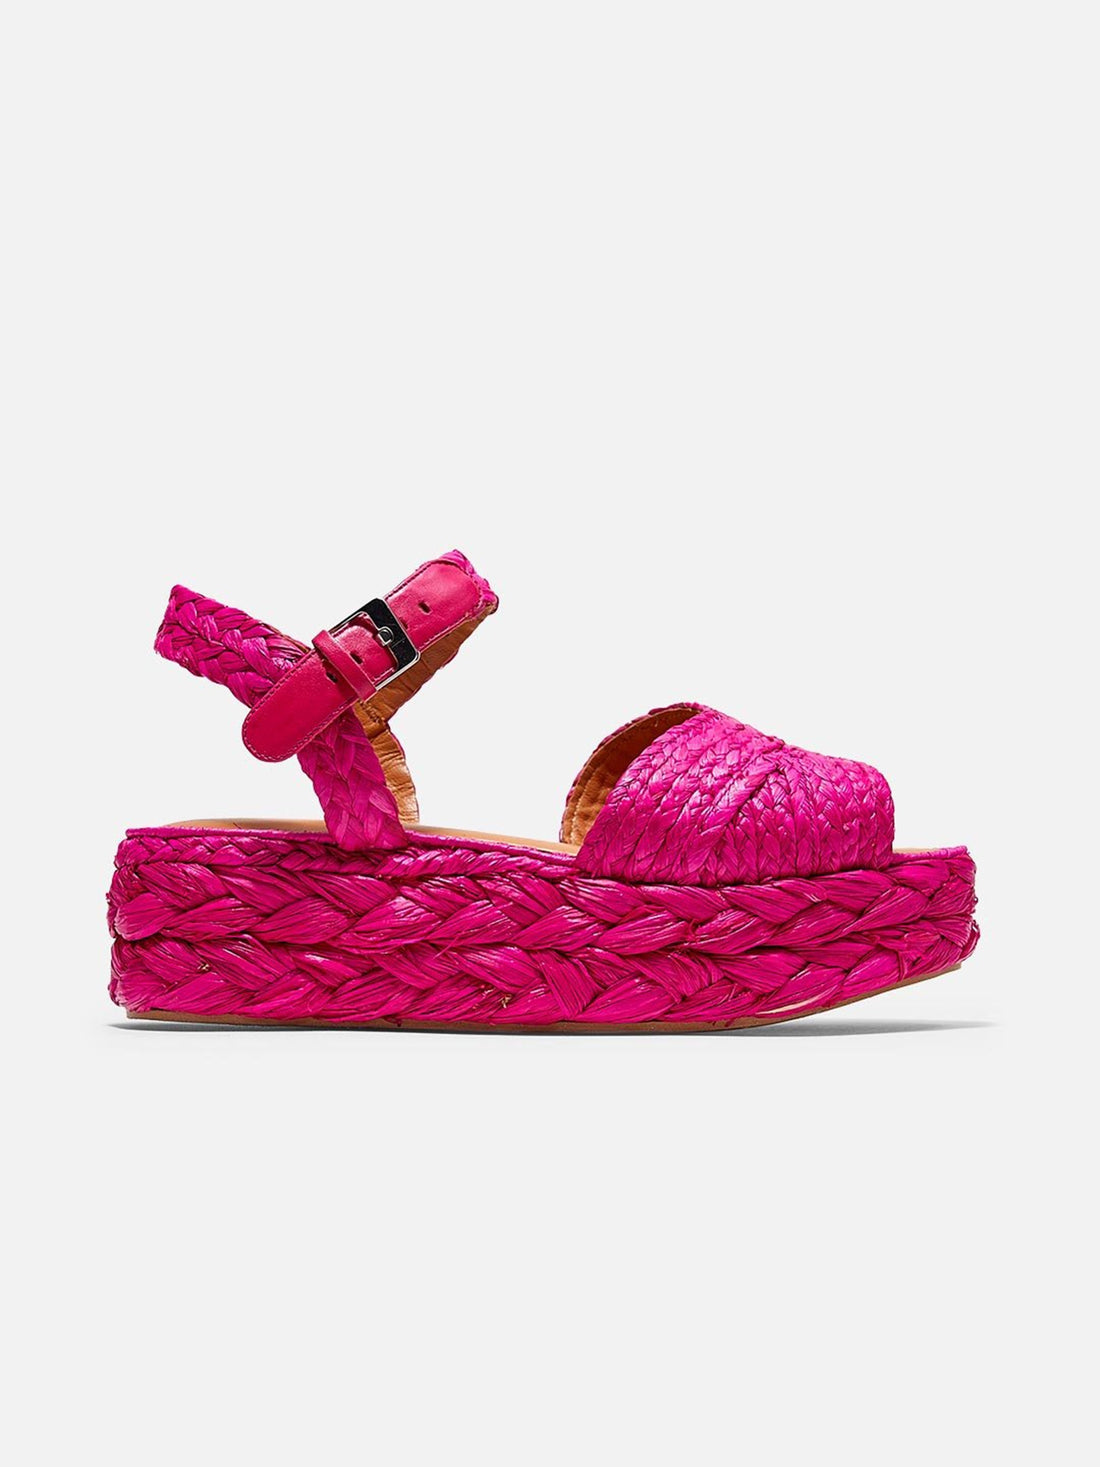 AIDA sandals, hibiscus pink straw and lambskin || OUTLET